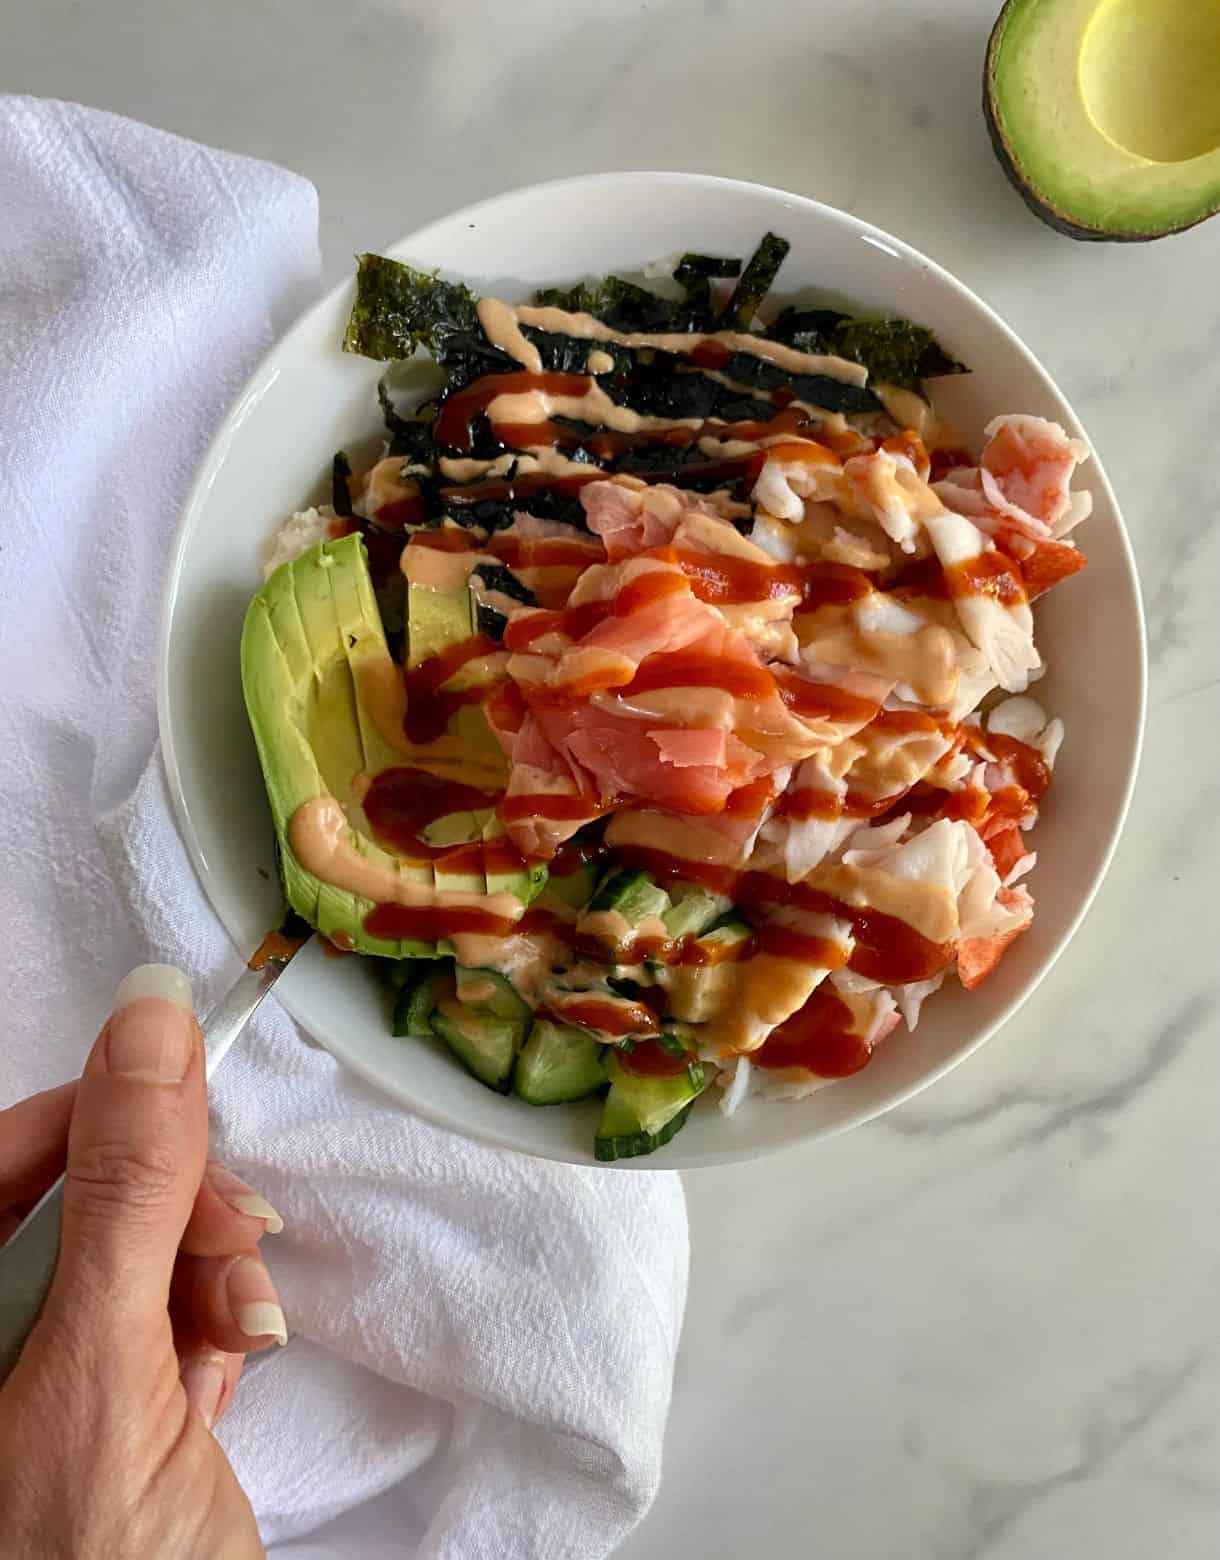 A Deconstructed Sushi Bowl with cauliflower rice, crab, avocado, cucumbers, seaweed, pickled ginger and sriracha mayo.